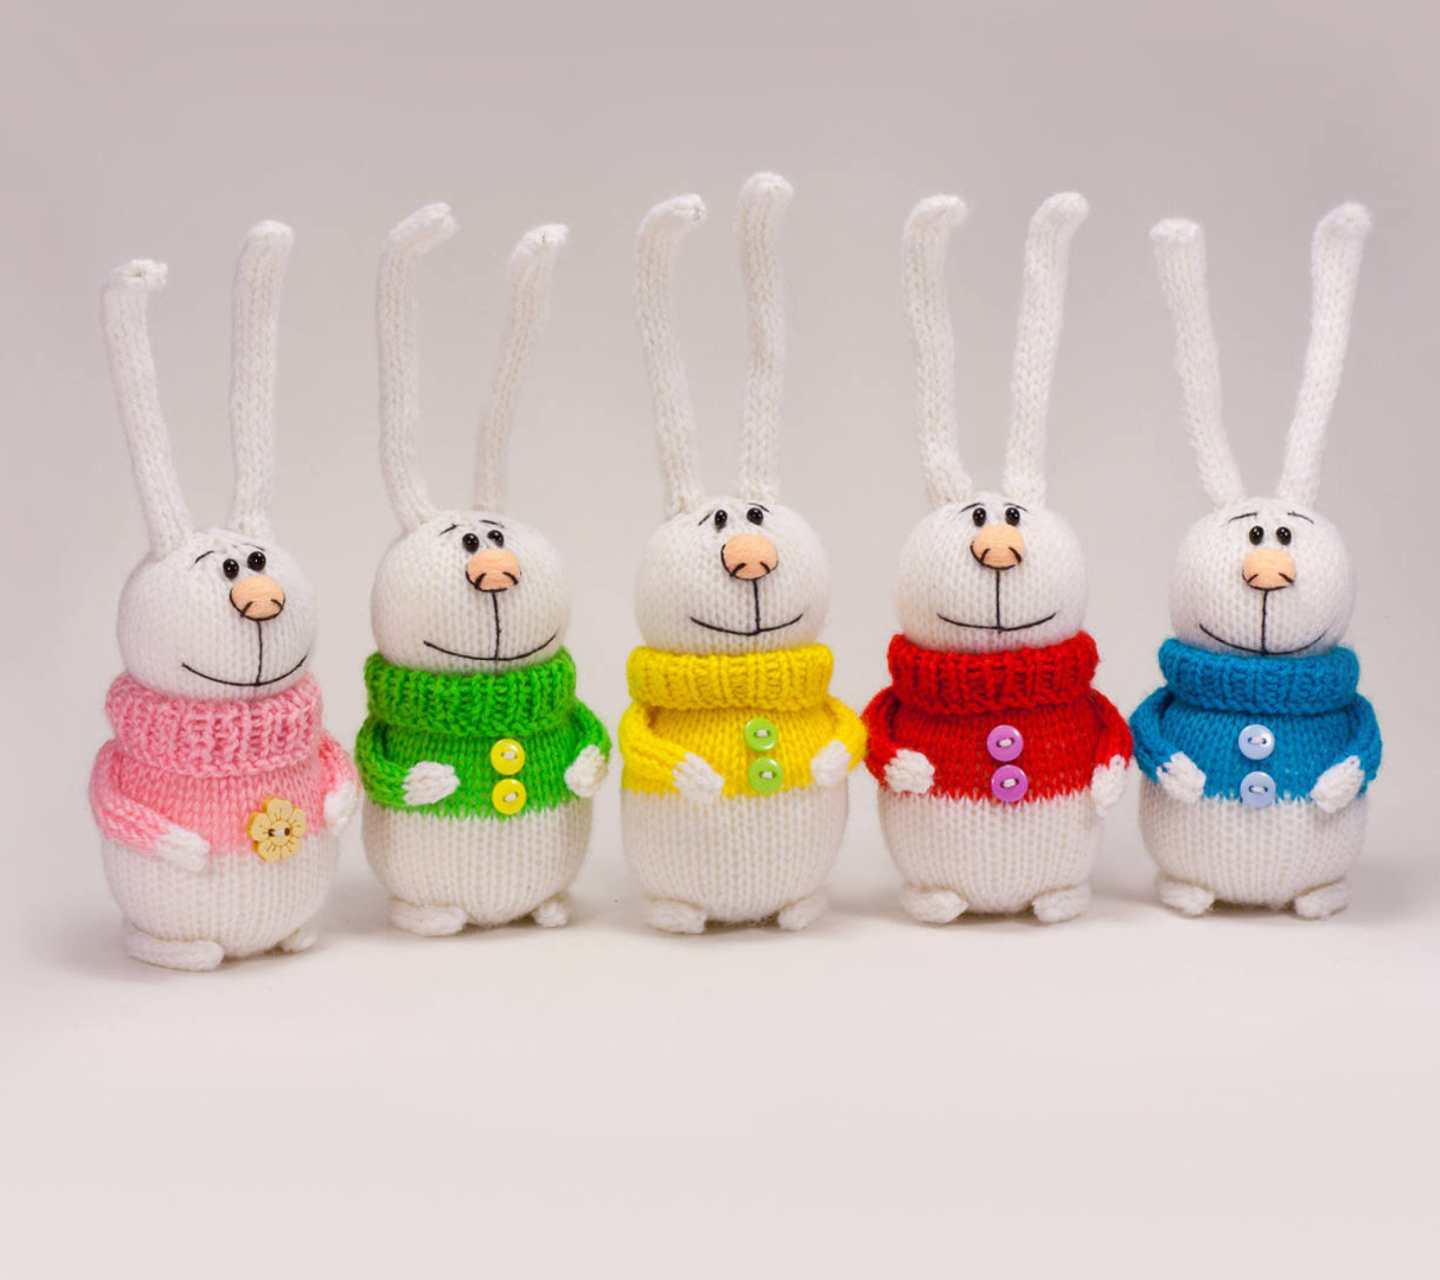 Knitted Bunnies In Colorful Sweaters wallpaper 1440x1280